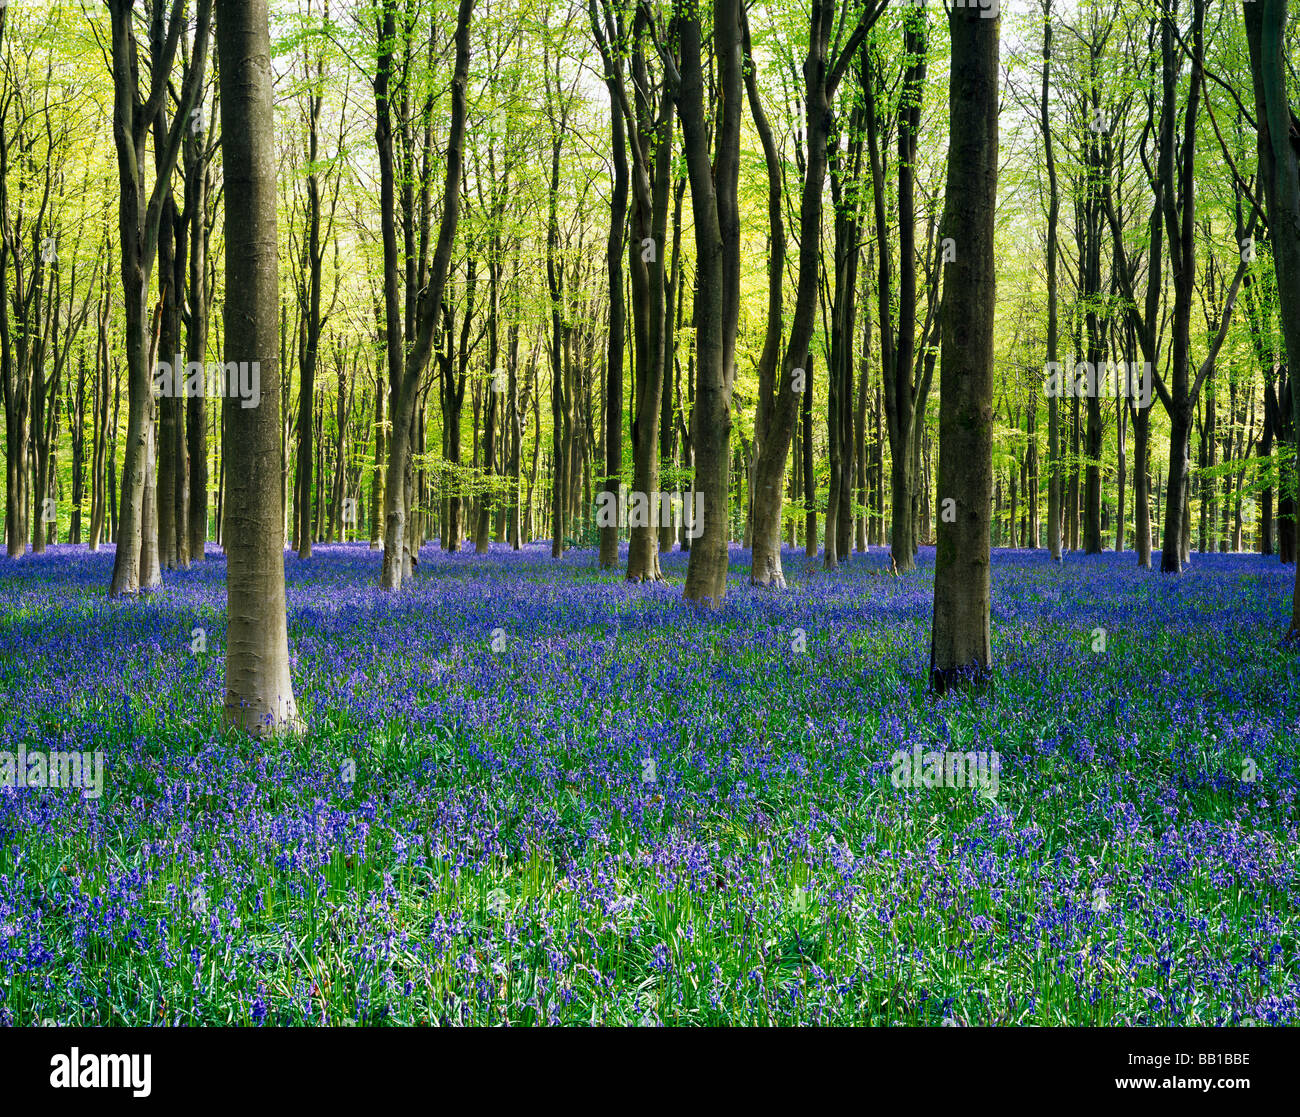 Bluebells in May at West Woods near Marlborough, Wiltshire, England Stock Photo